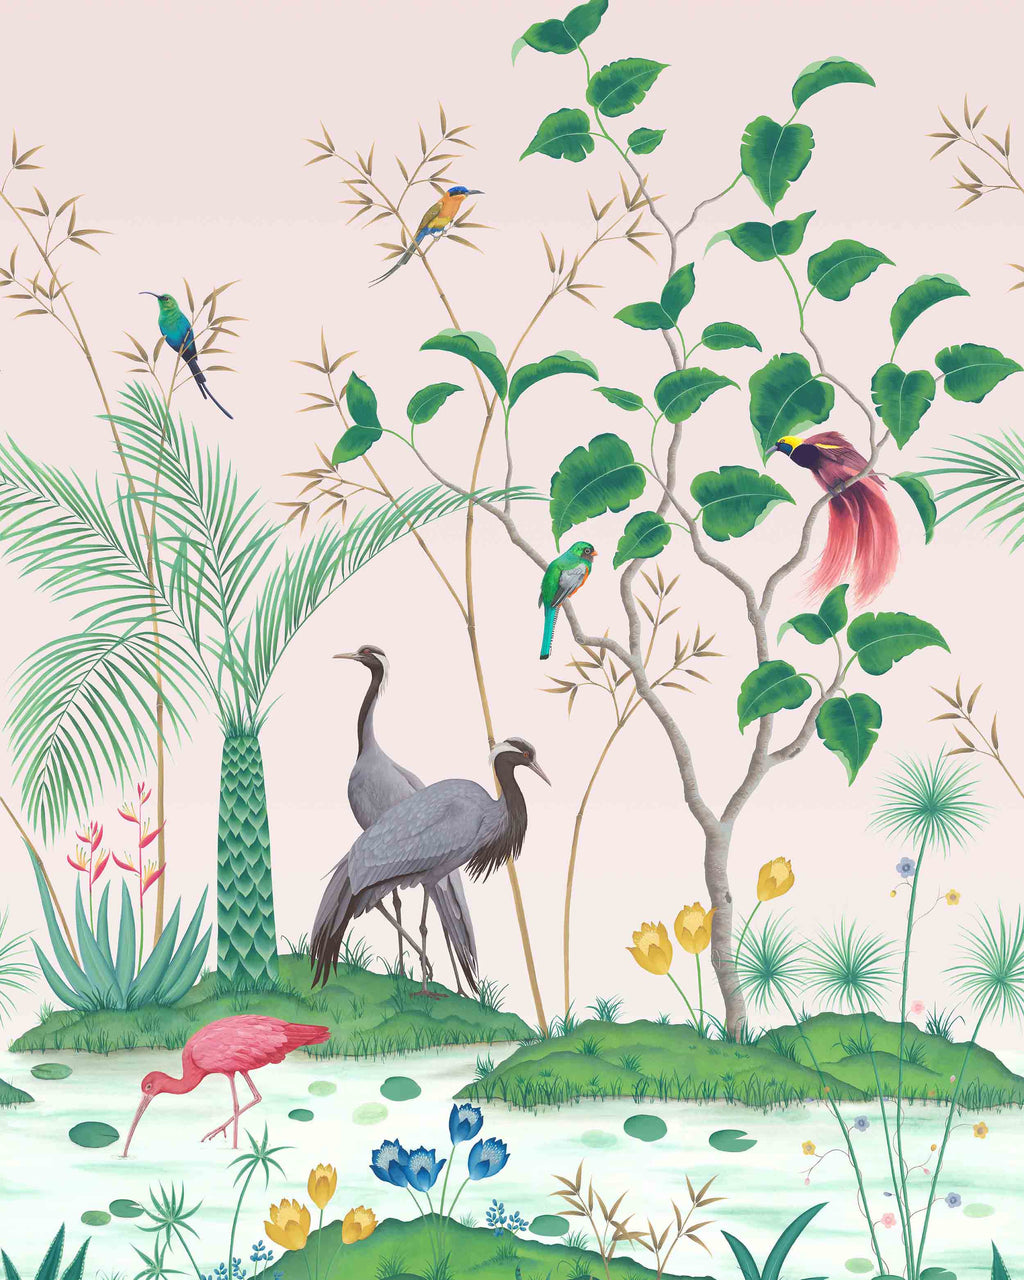 A stunning design created exclusively for Osborne & Little for their Empyrea range, featuring blue herons, palm trees and rambling botanicals. Mirage has been designed exclusively for Osborne & Little by Diane Hill and Joanna Charlotte .The finished piece